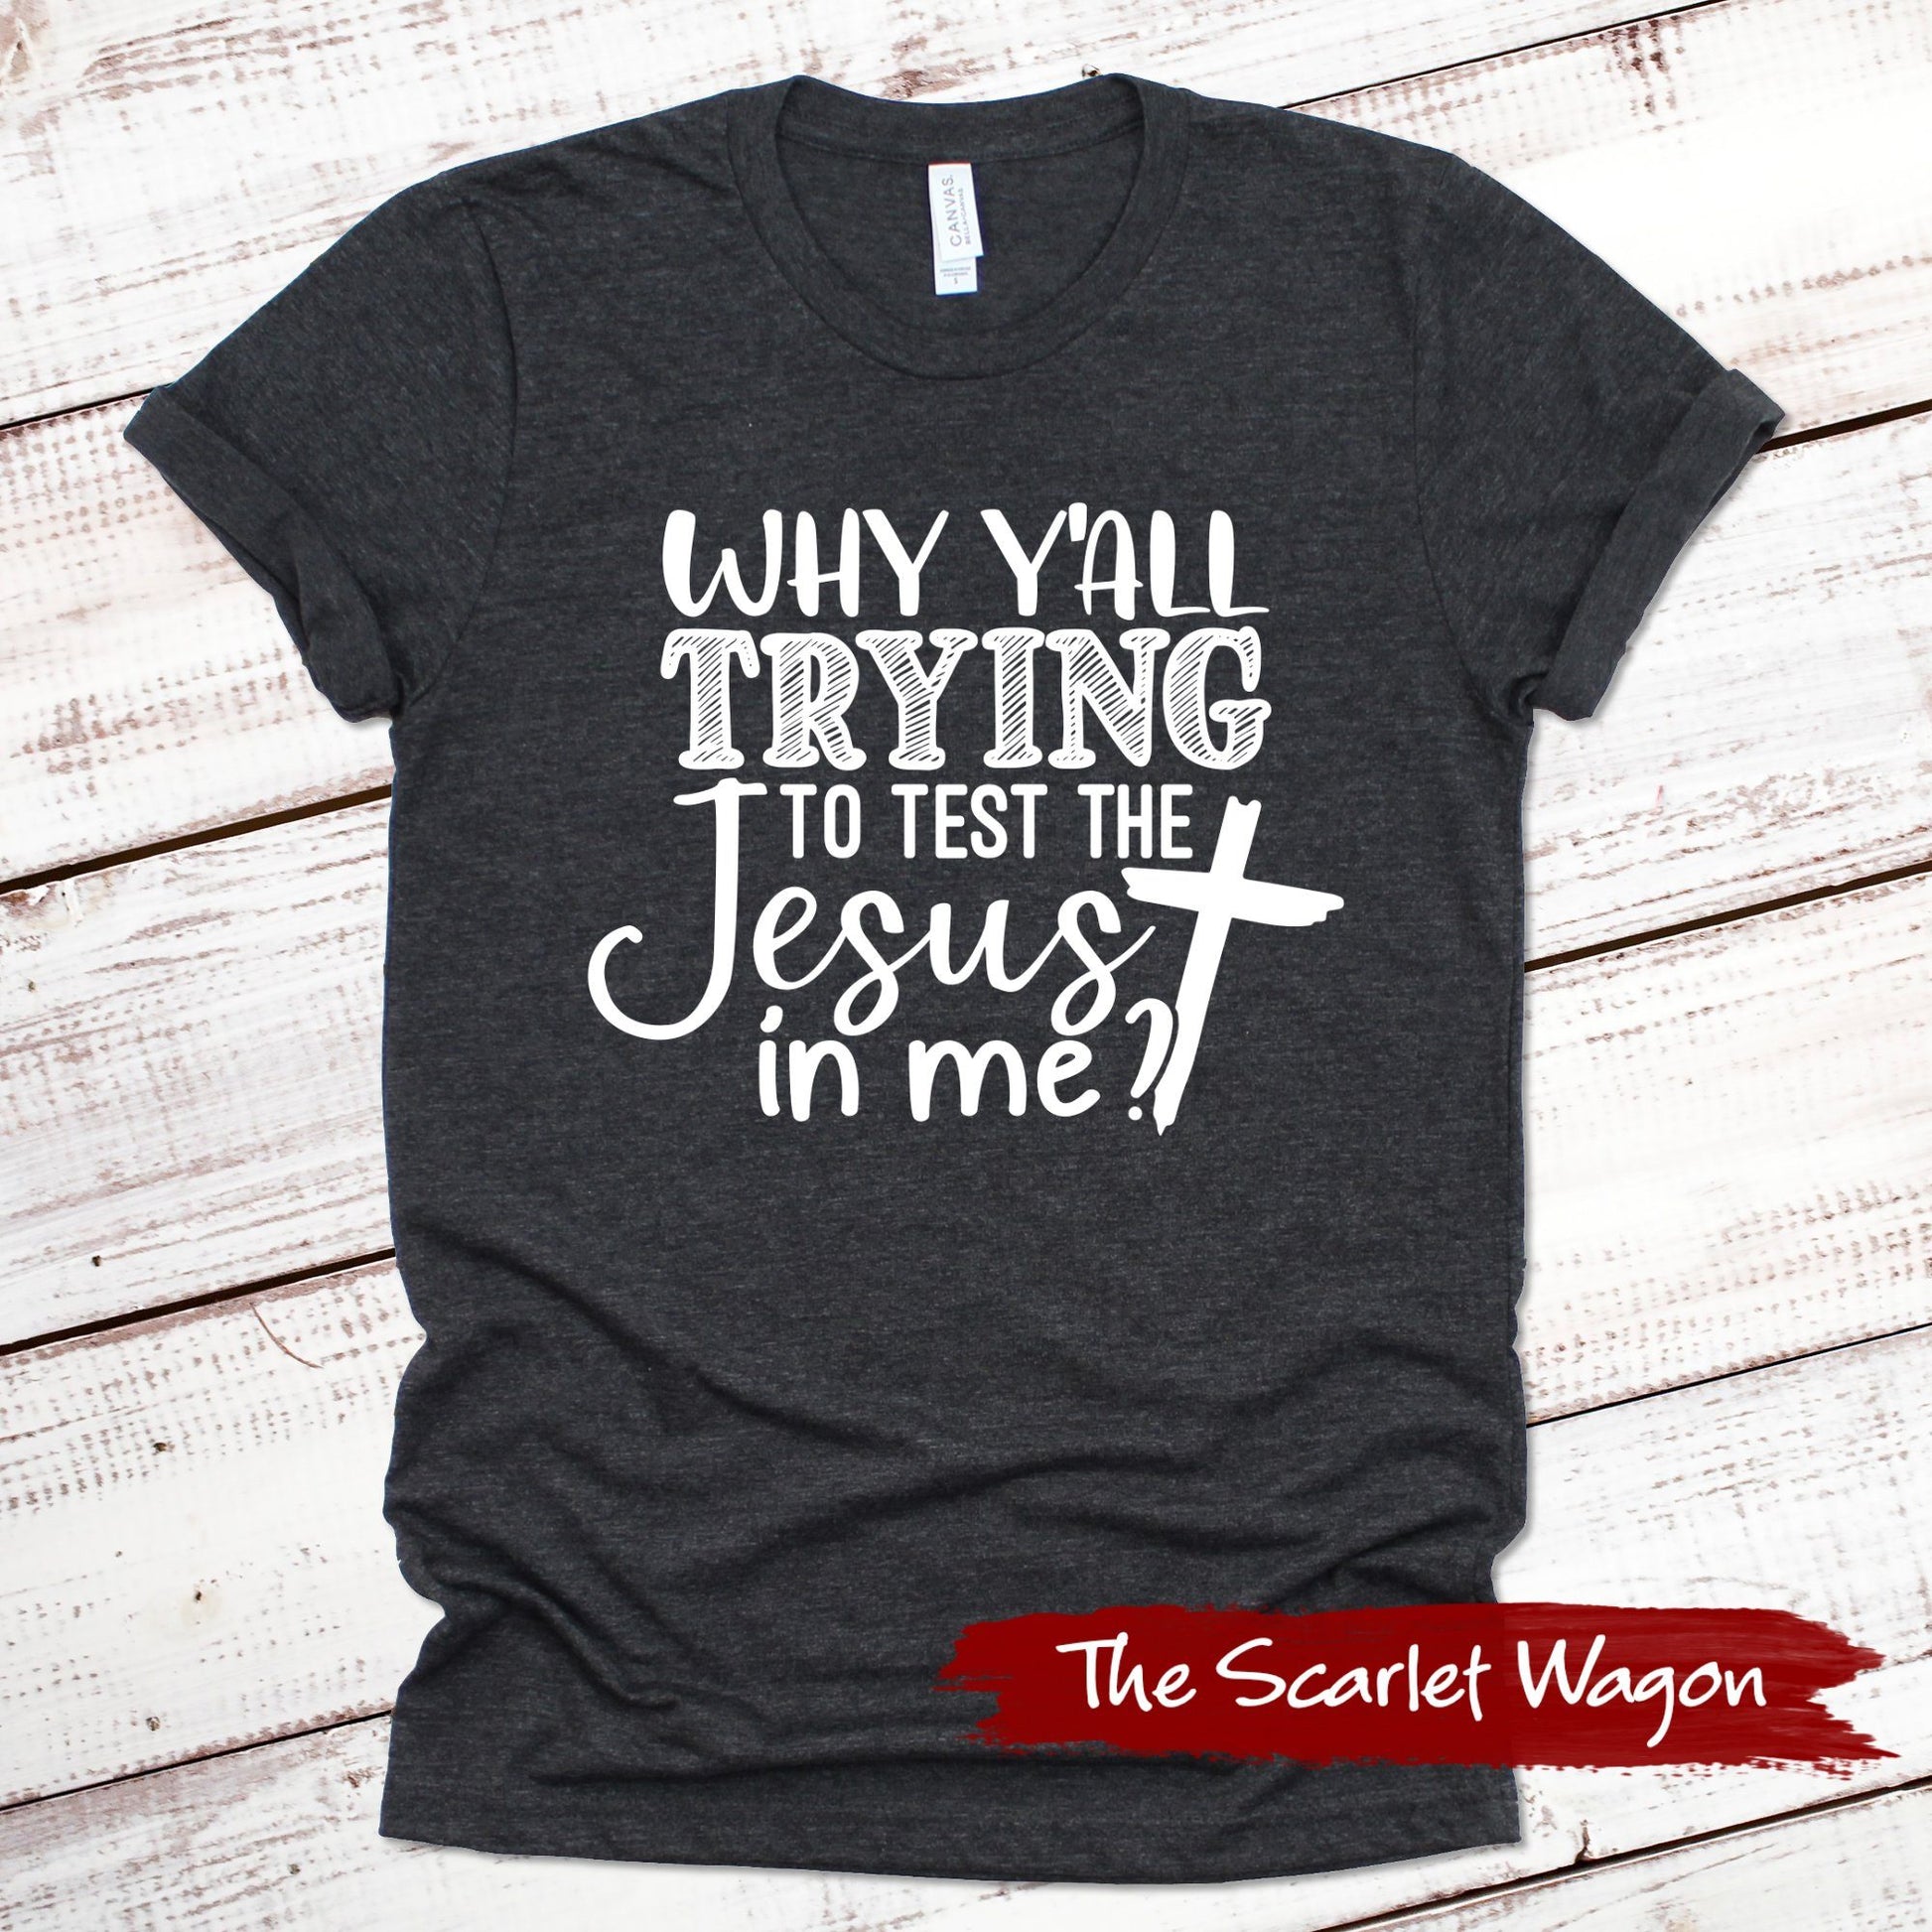 Why Y'all Trying to Test the Jesus in Me Funny Shirt Scarlet Wagon Dark Gray Heather XS 